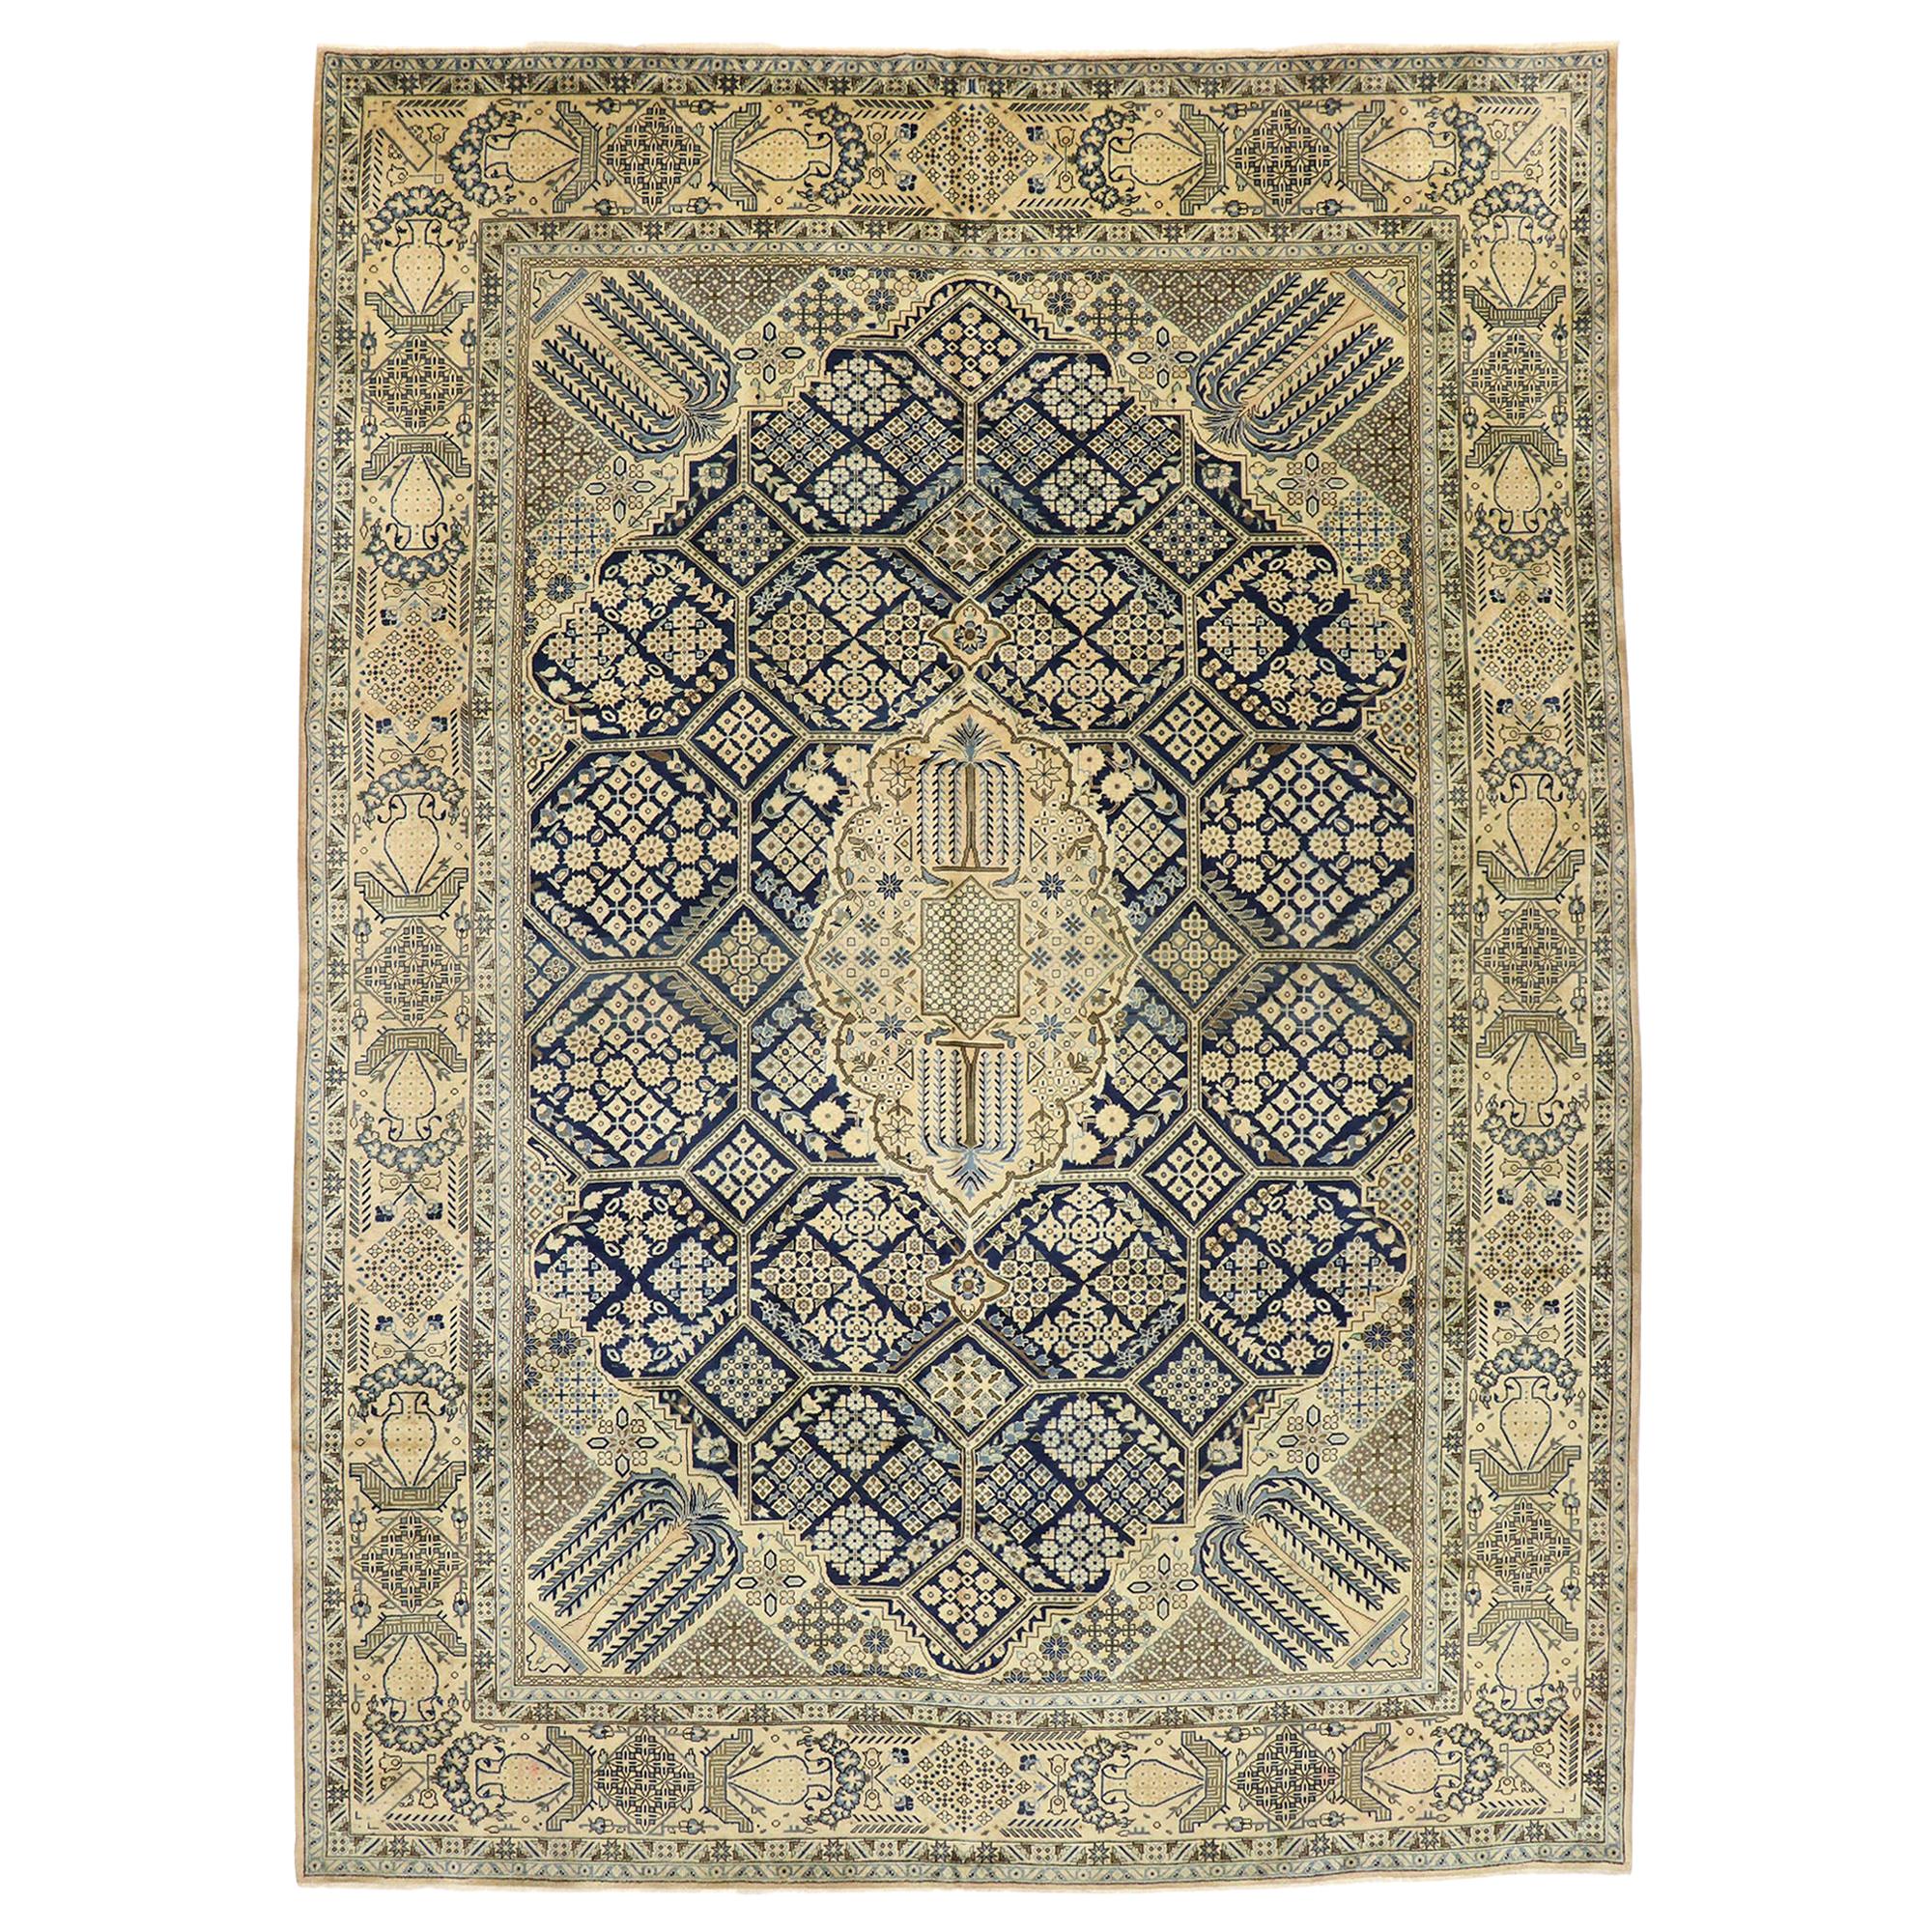 Vintage Persian Najafabad Rug with Joshegan Design and French Country Style